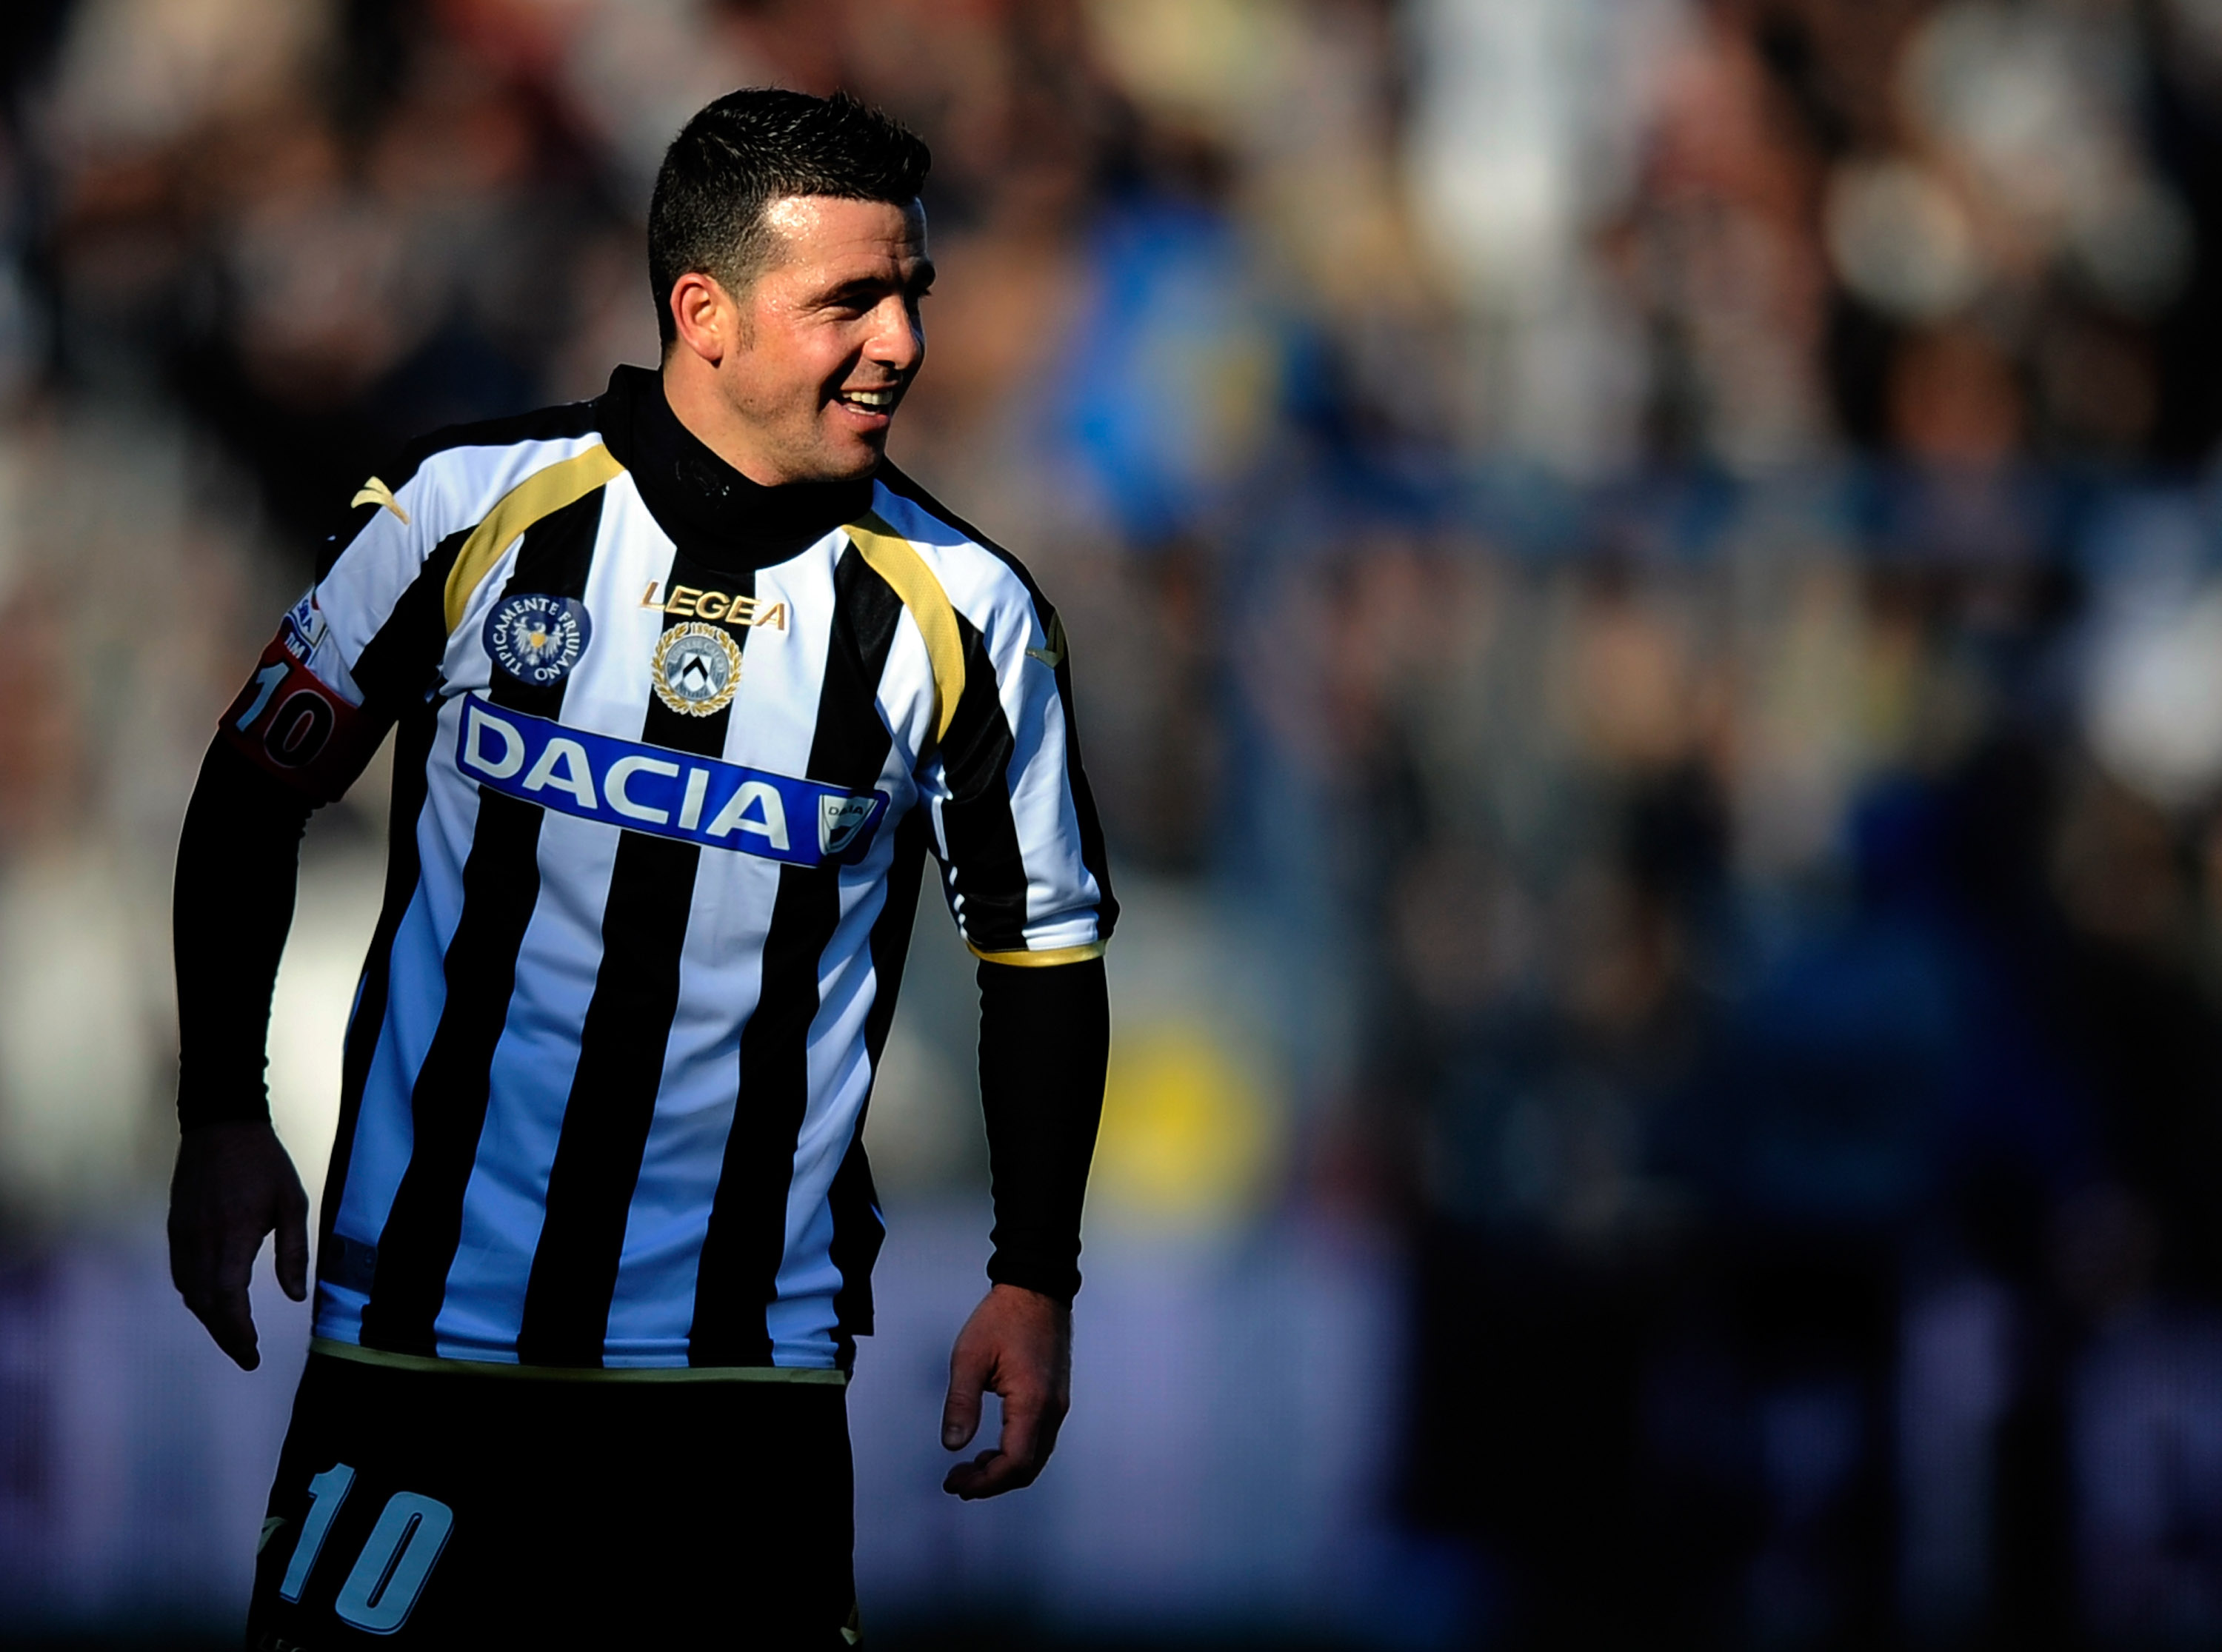 UDINE, ITALY - JANUARY 23:  Antonio Di Natale of Udinese Calcio during the Serie A match between Udinese and Inter at Stadio Friuli on January 23, 2011 in Udine, Italy.  (Photo by Claudio Villa/Getty Images)